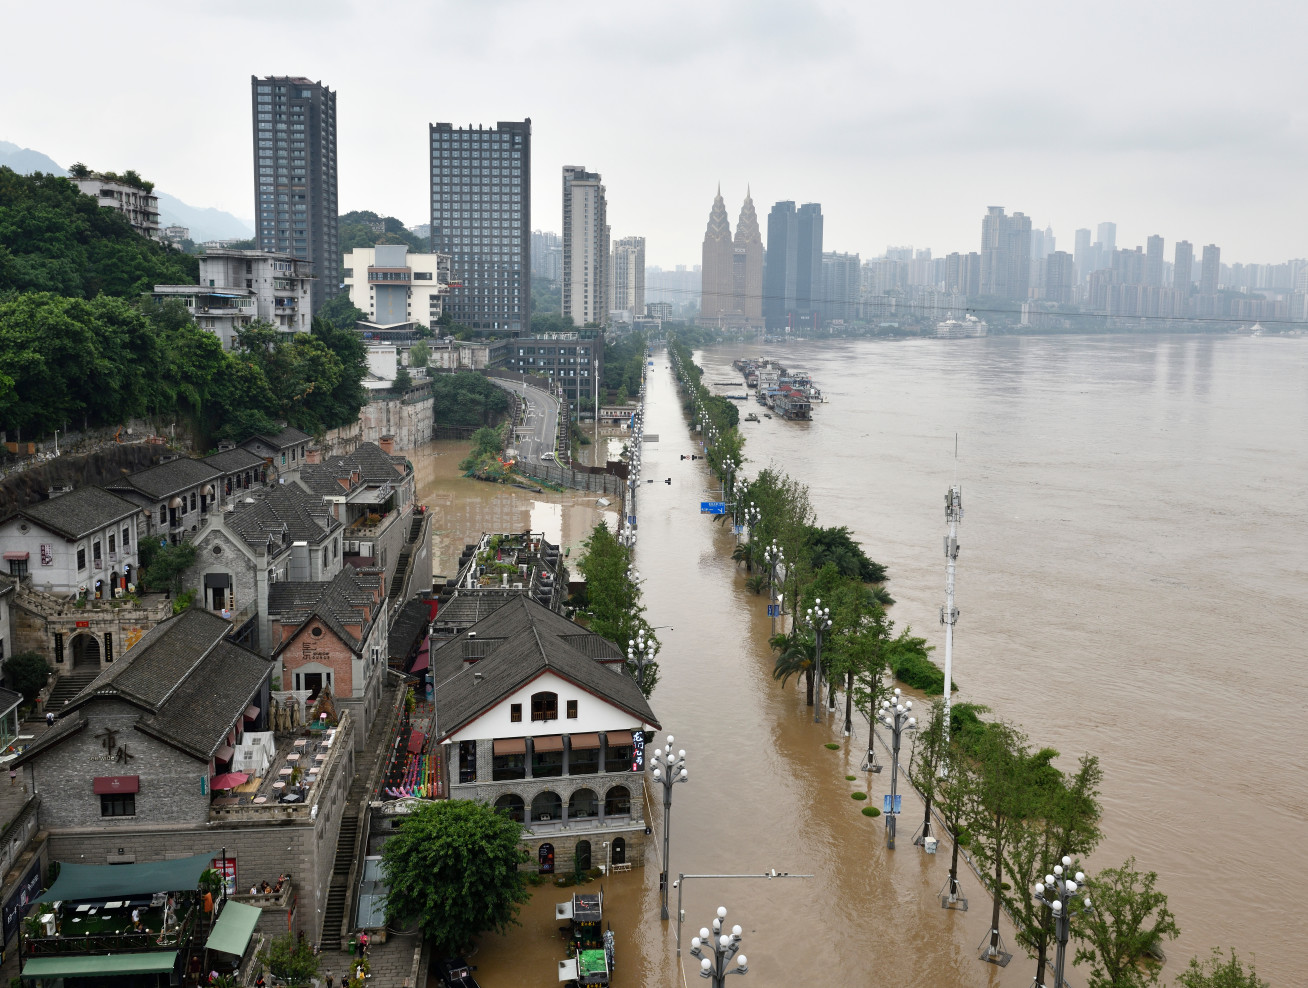 Flooding in Chongqing, China, in the summer of 2020.